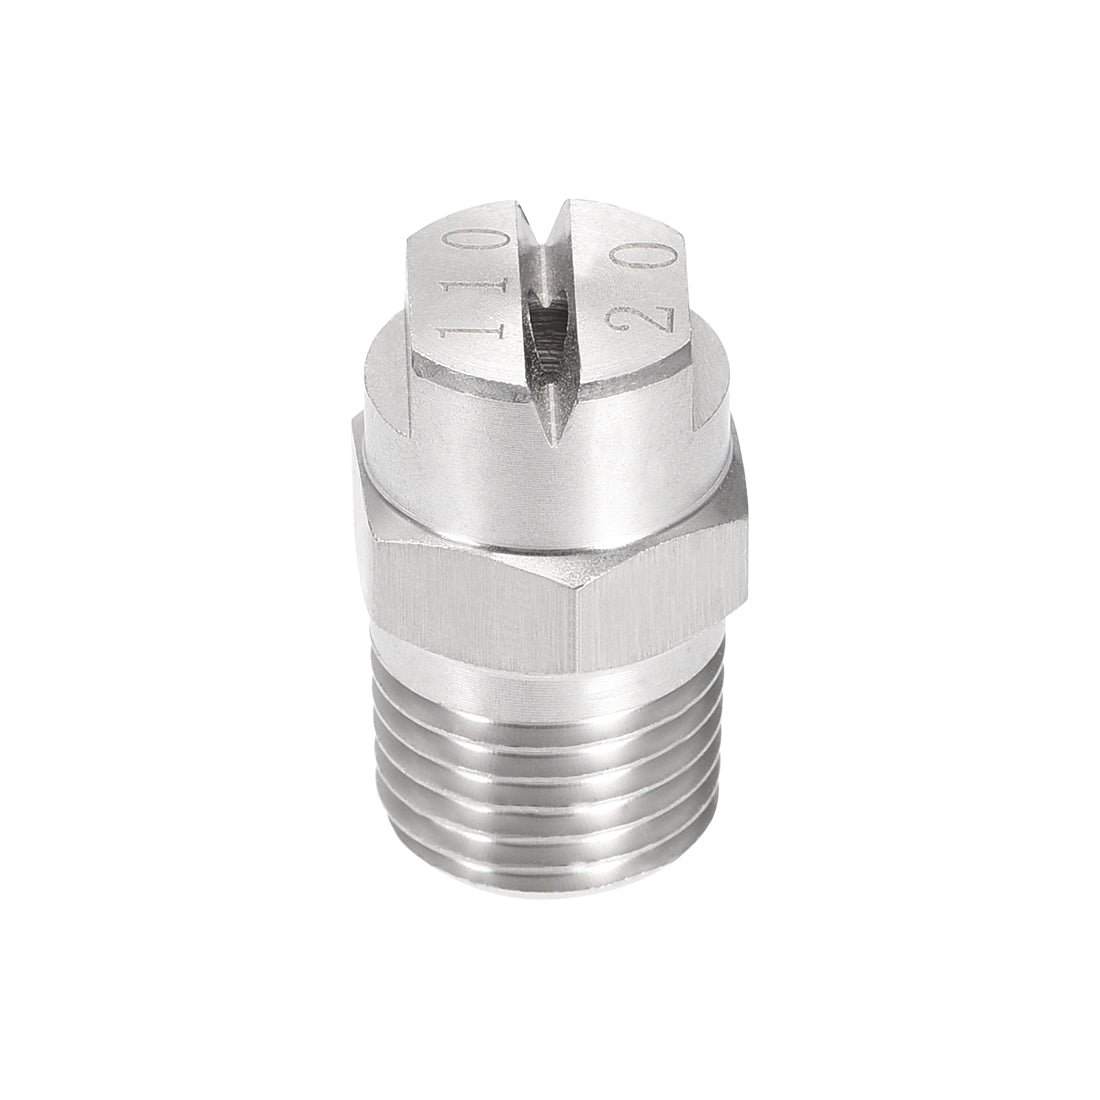 Uxcell Uxcell Flat Fan Spray Tip - 1/4BSPT Male Thread 304 Stainless Steel Nozzle - 110 Degree 1.1mm Orifice Diameter